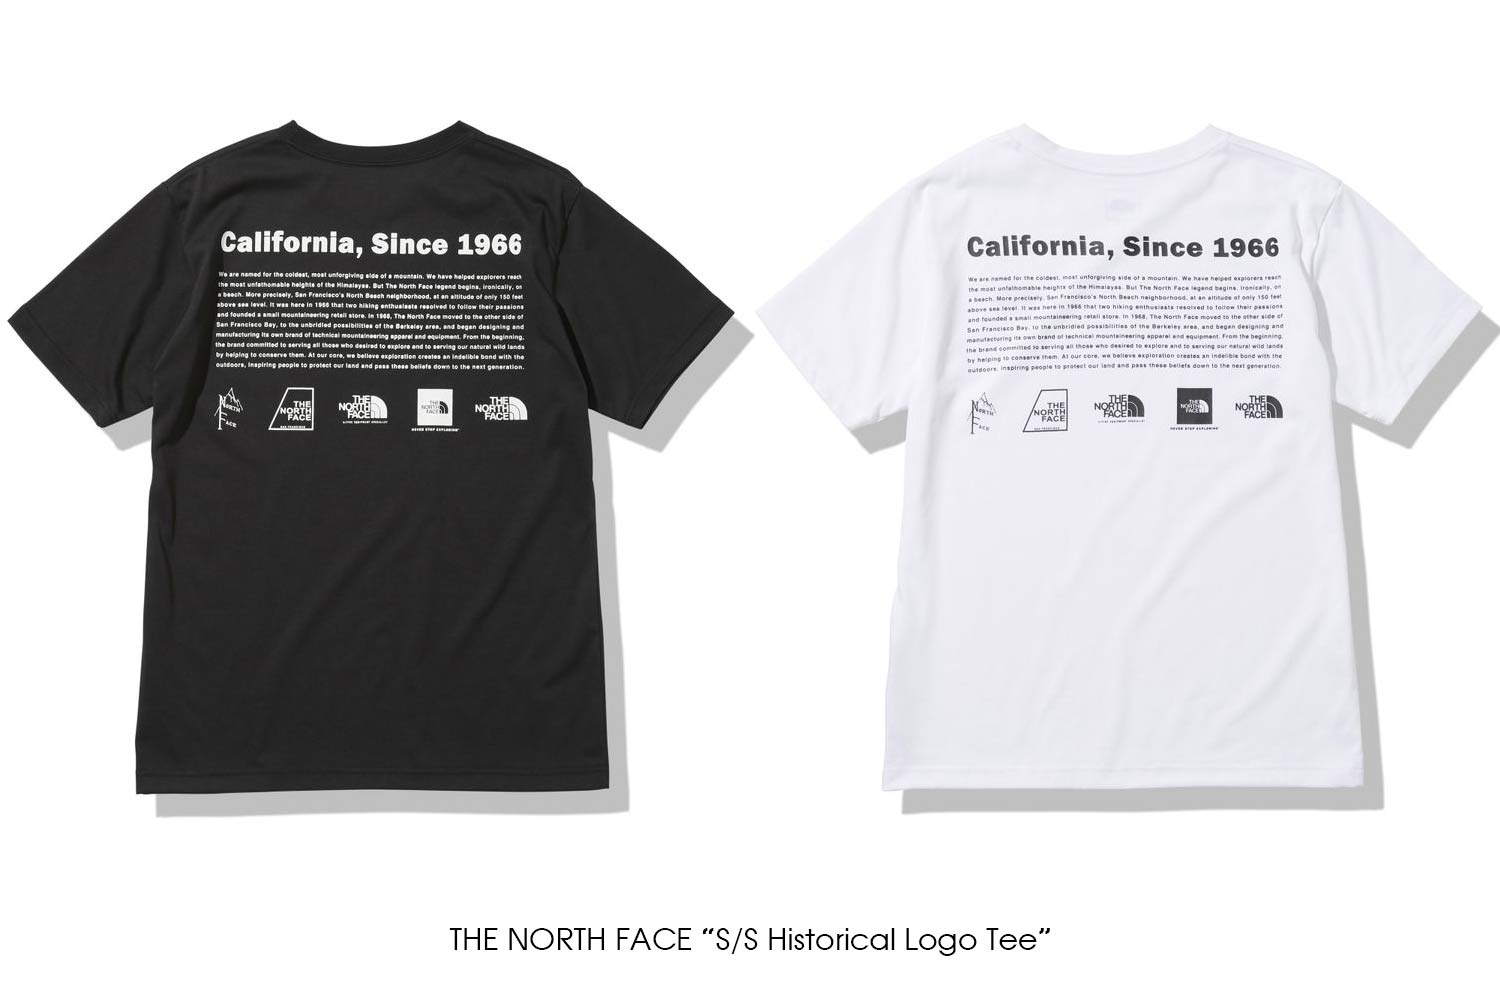 THE NORTH FACE "S/S Historical Logo Tee"